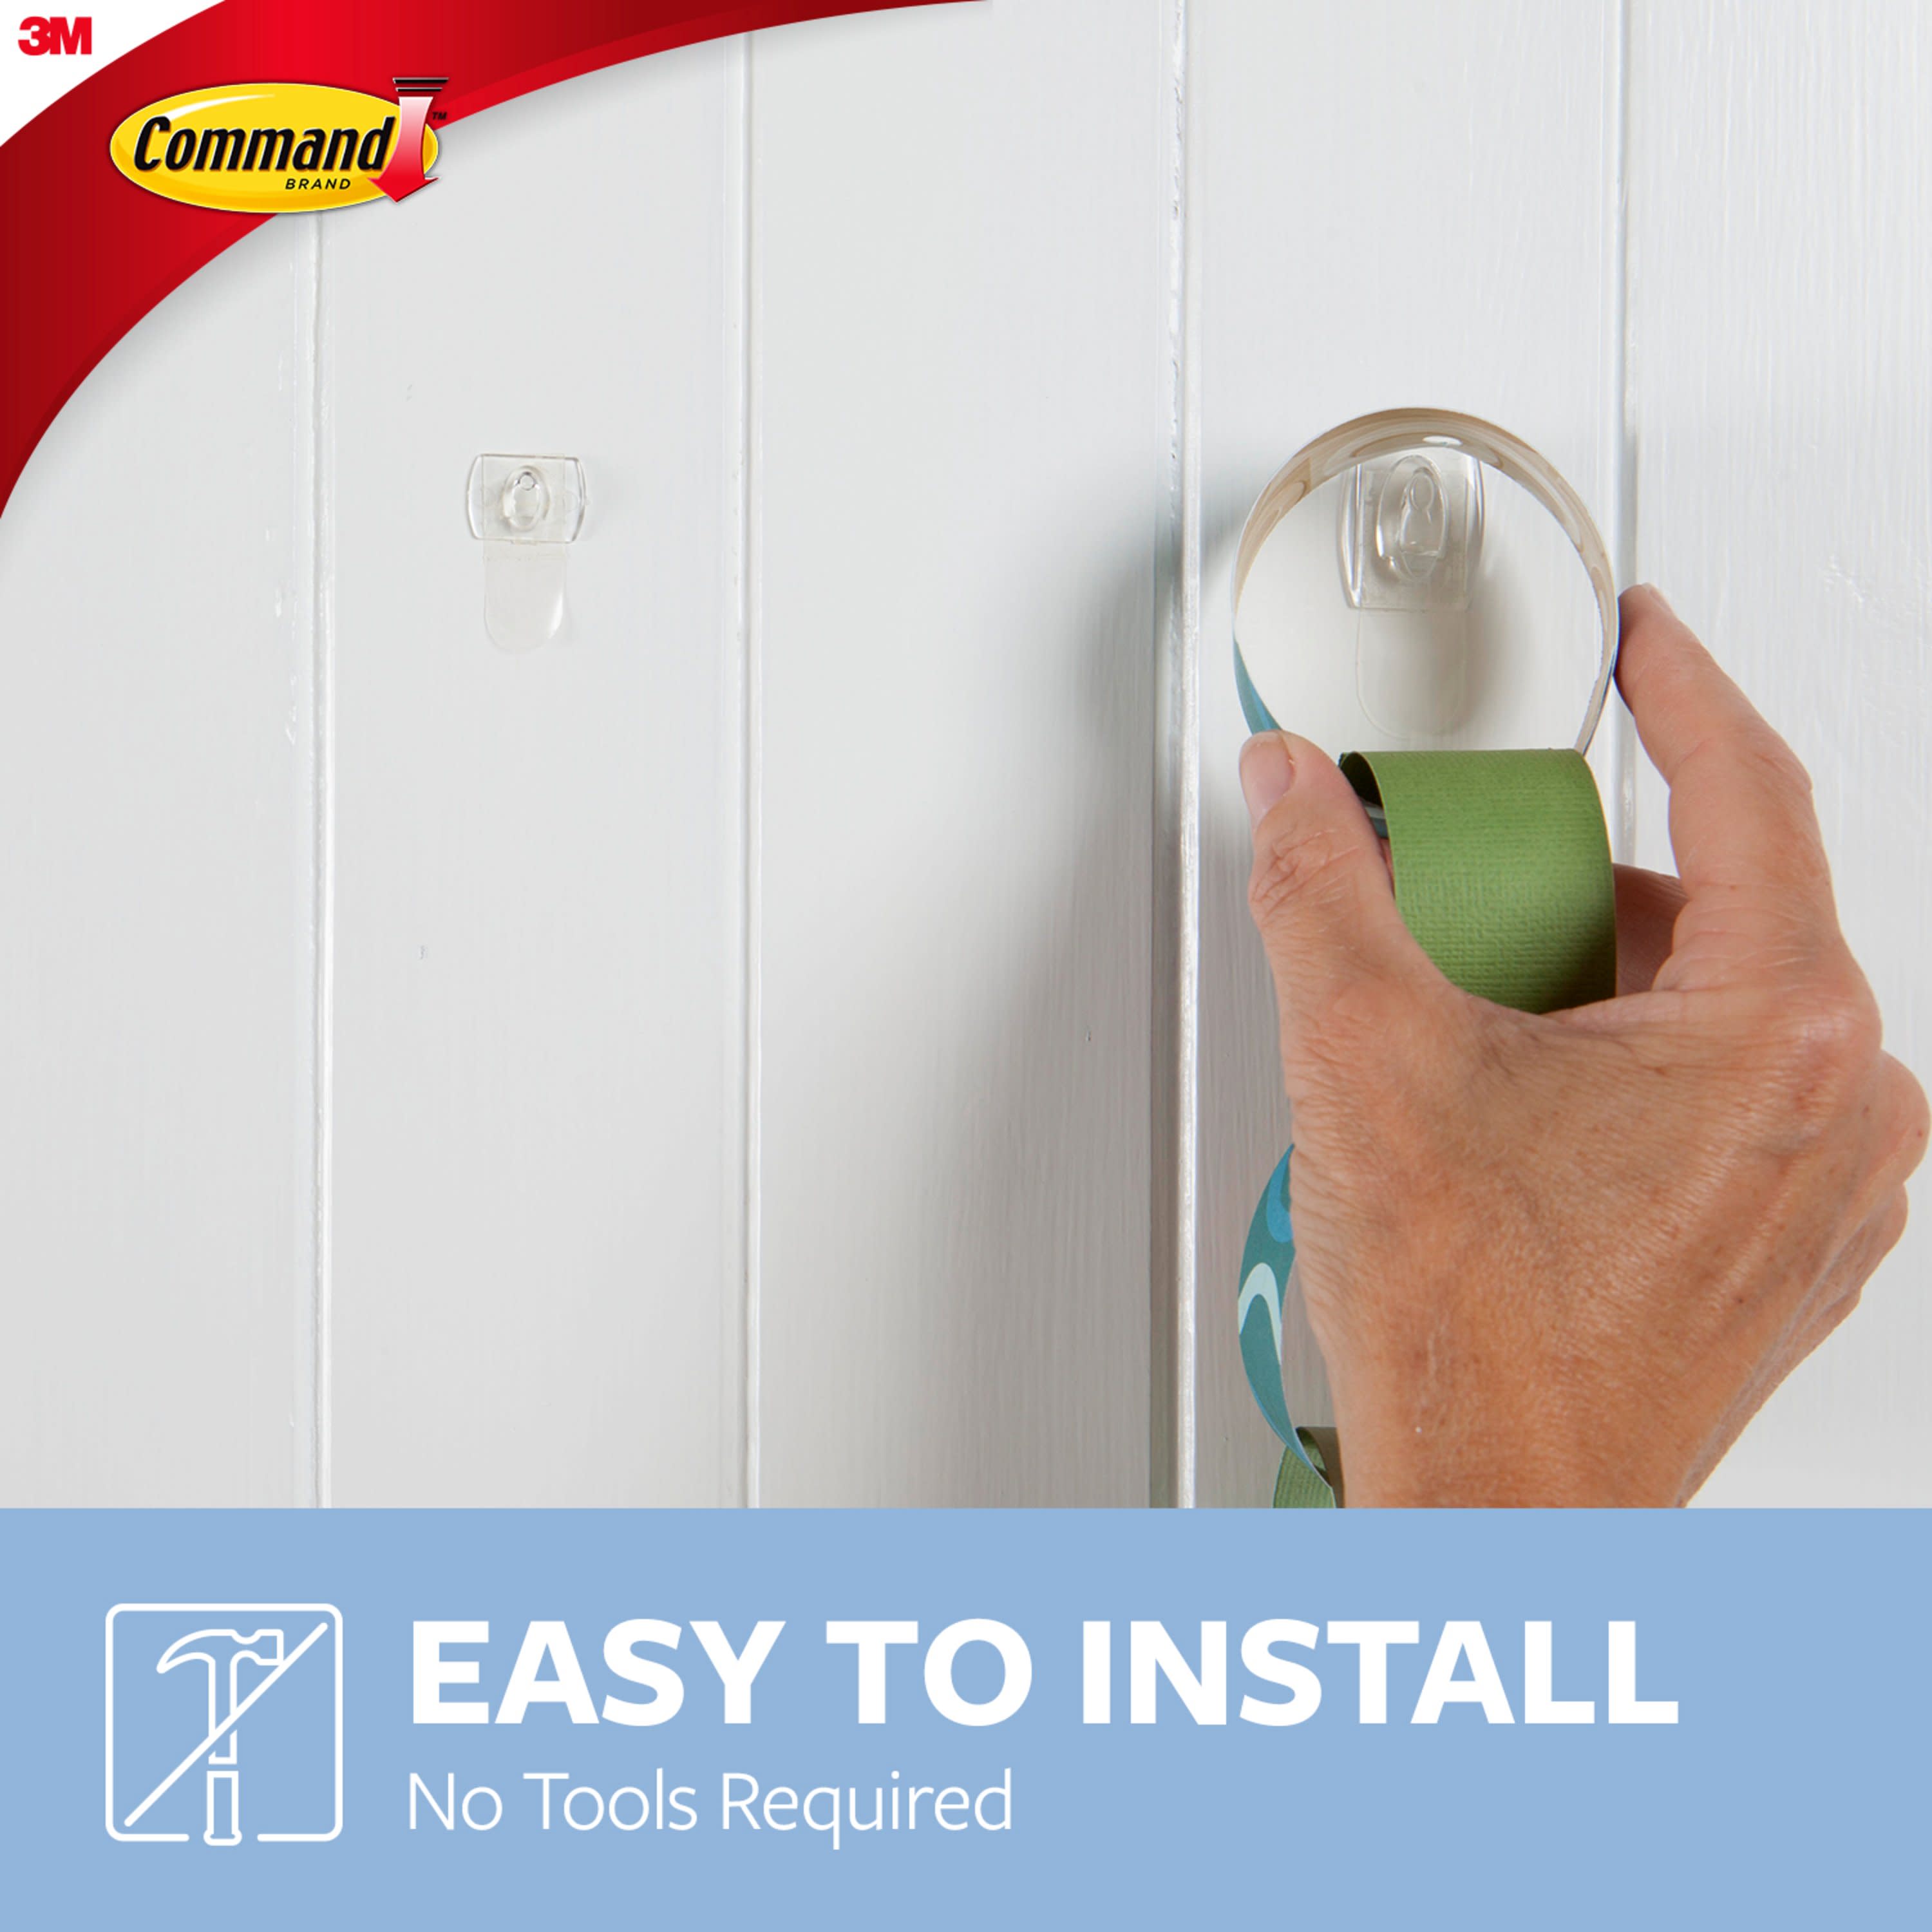 Command Mini Wall Hooks, Clear, Damage Free Decorating, Six Hooks and Eight Command Strips - image 5 of 13